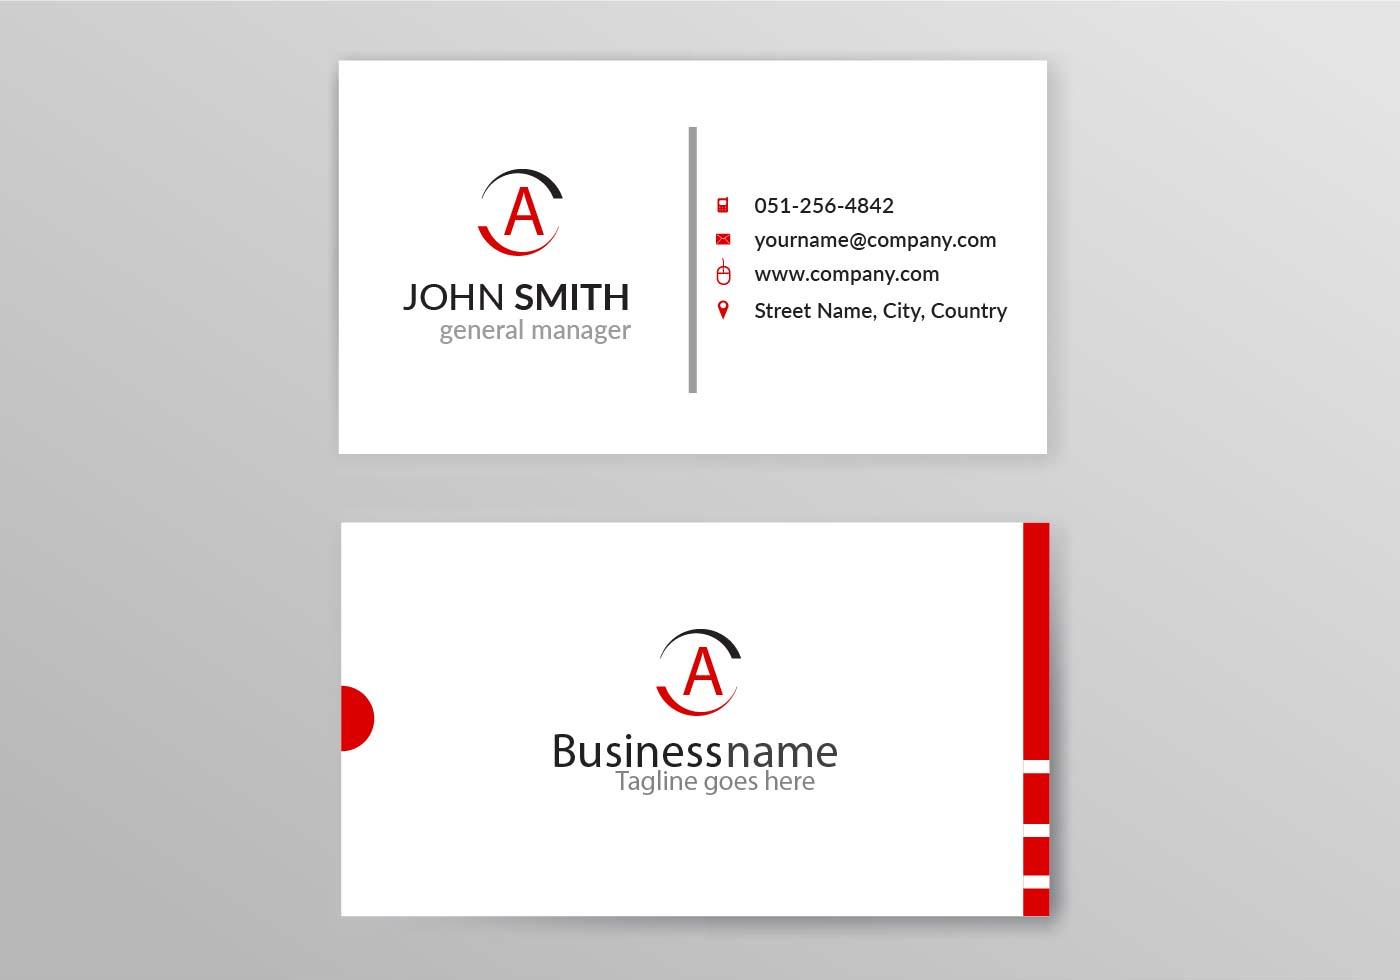 Business card vector free download